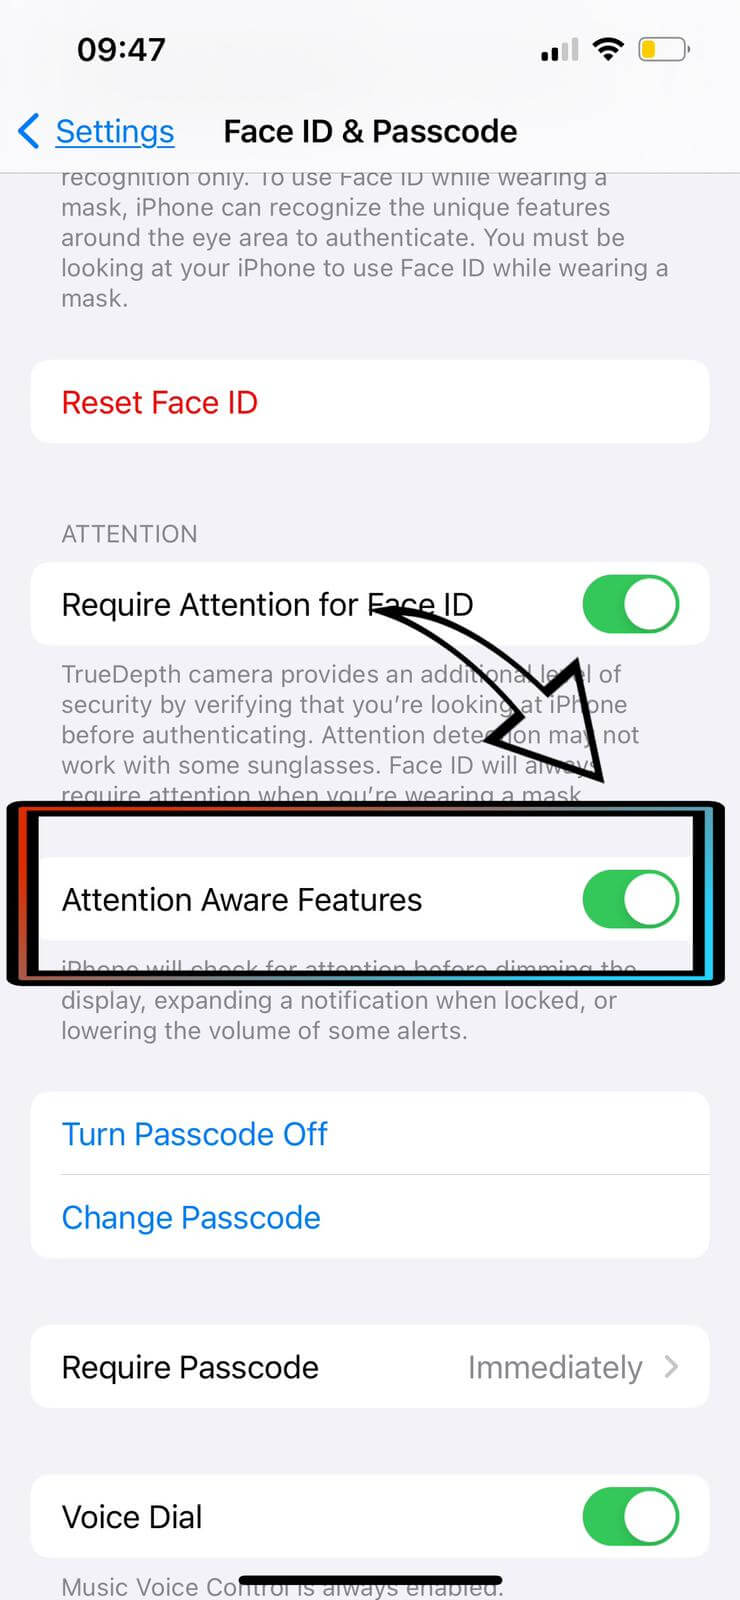 Disabling Attention Awareness Features